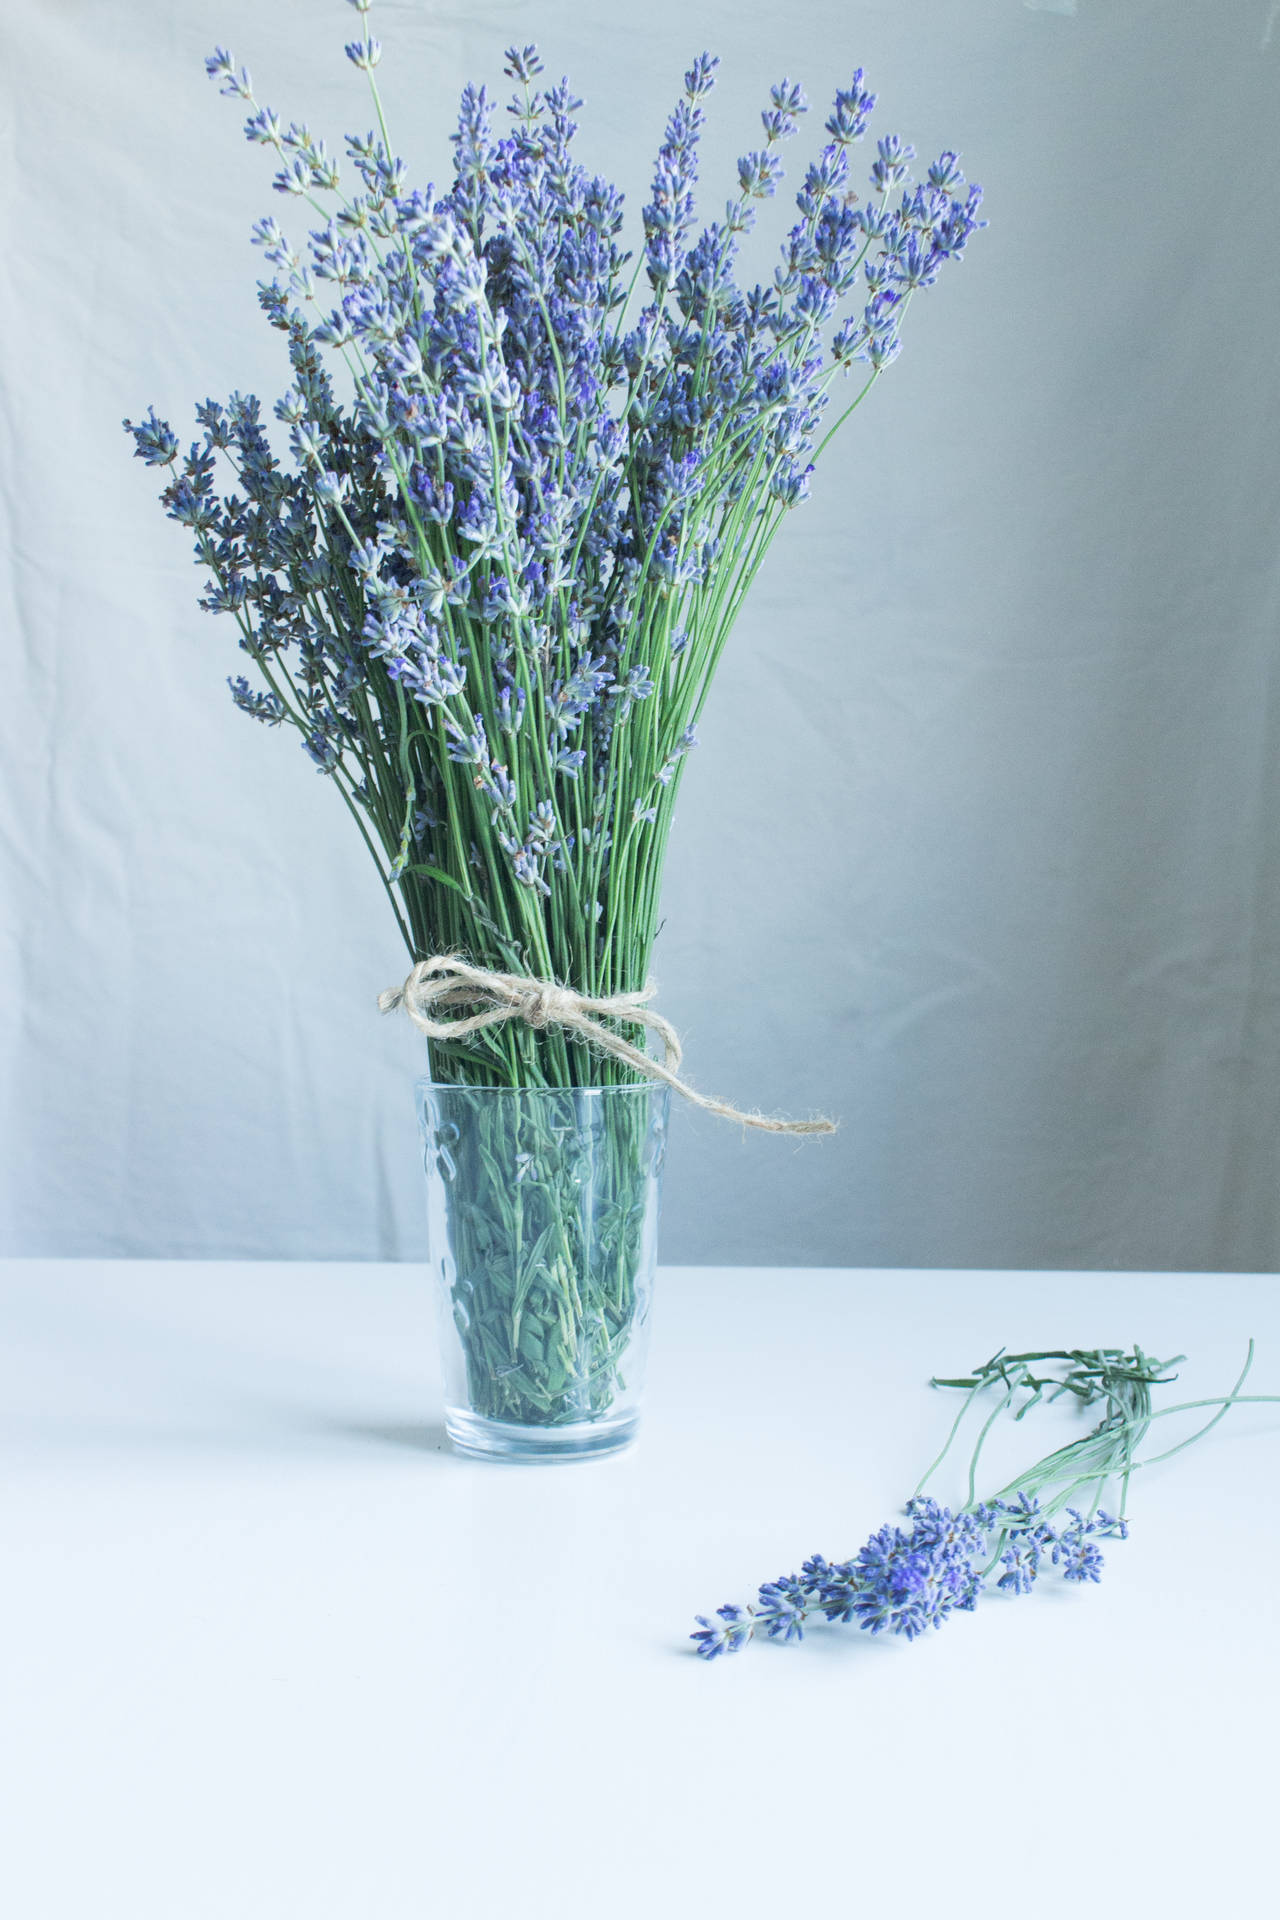 Lavender 3155X4732 Wallpaper and Background Image